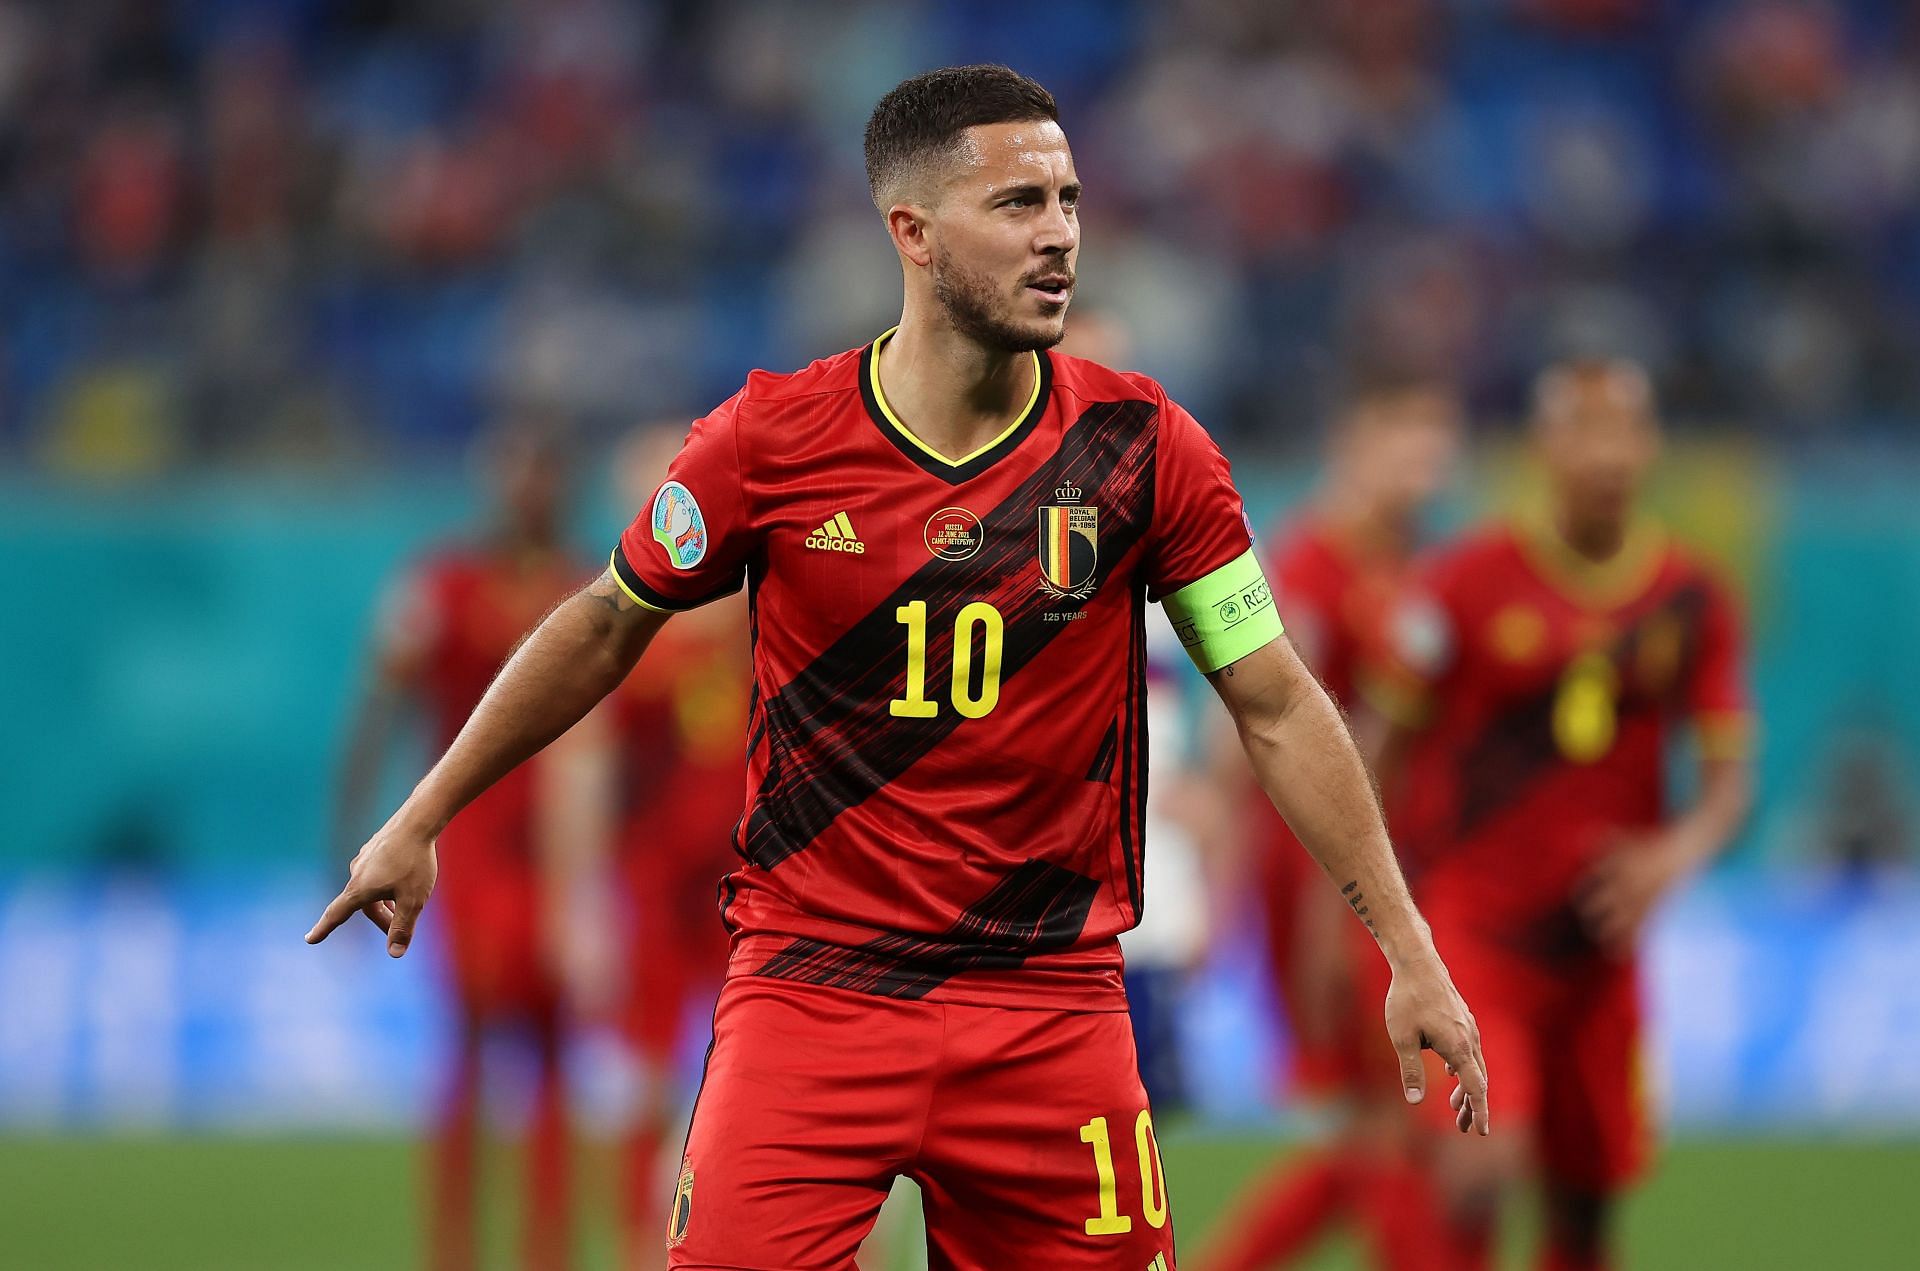 Cam Eden Hazard play a starring role for Belgium at the 2022 FIFA World Cup?